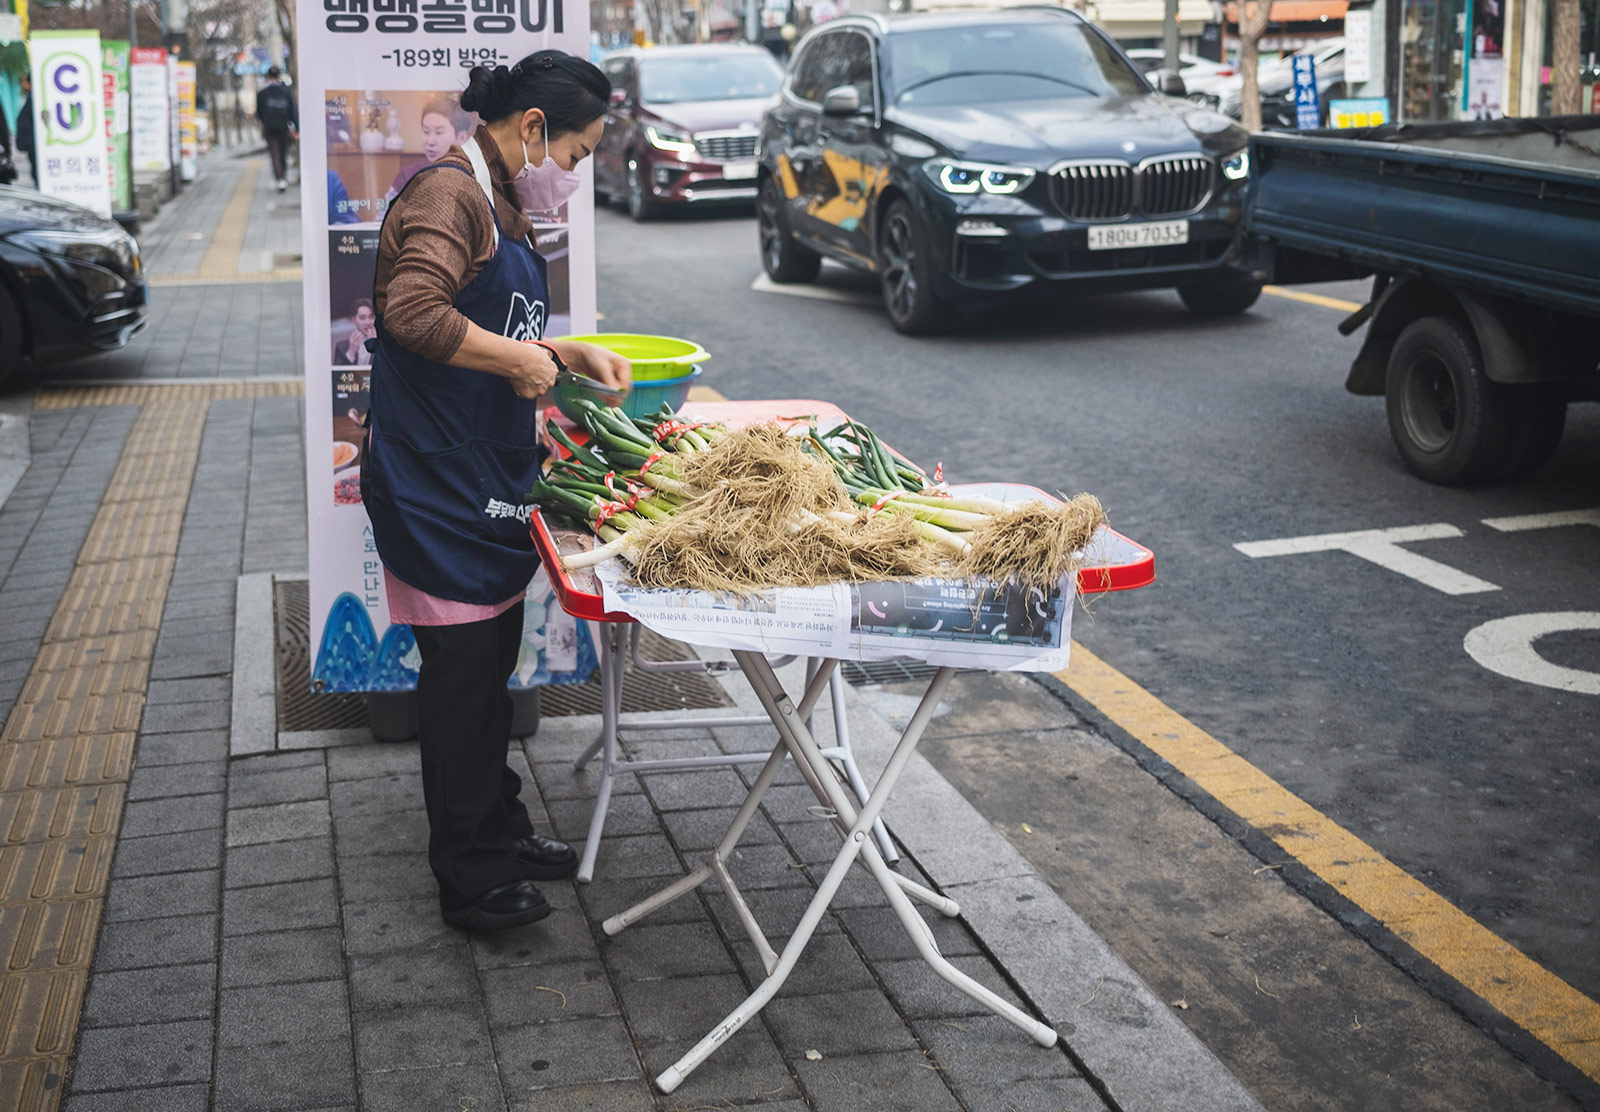 Woman cutting onions on table in the street